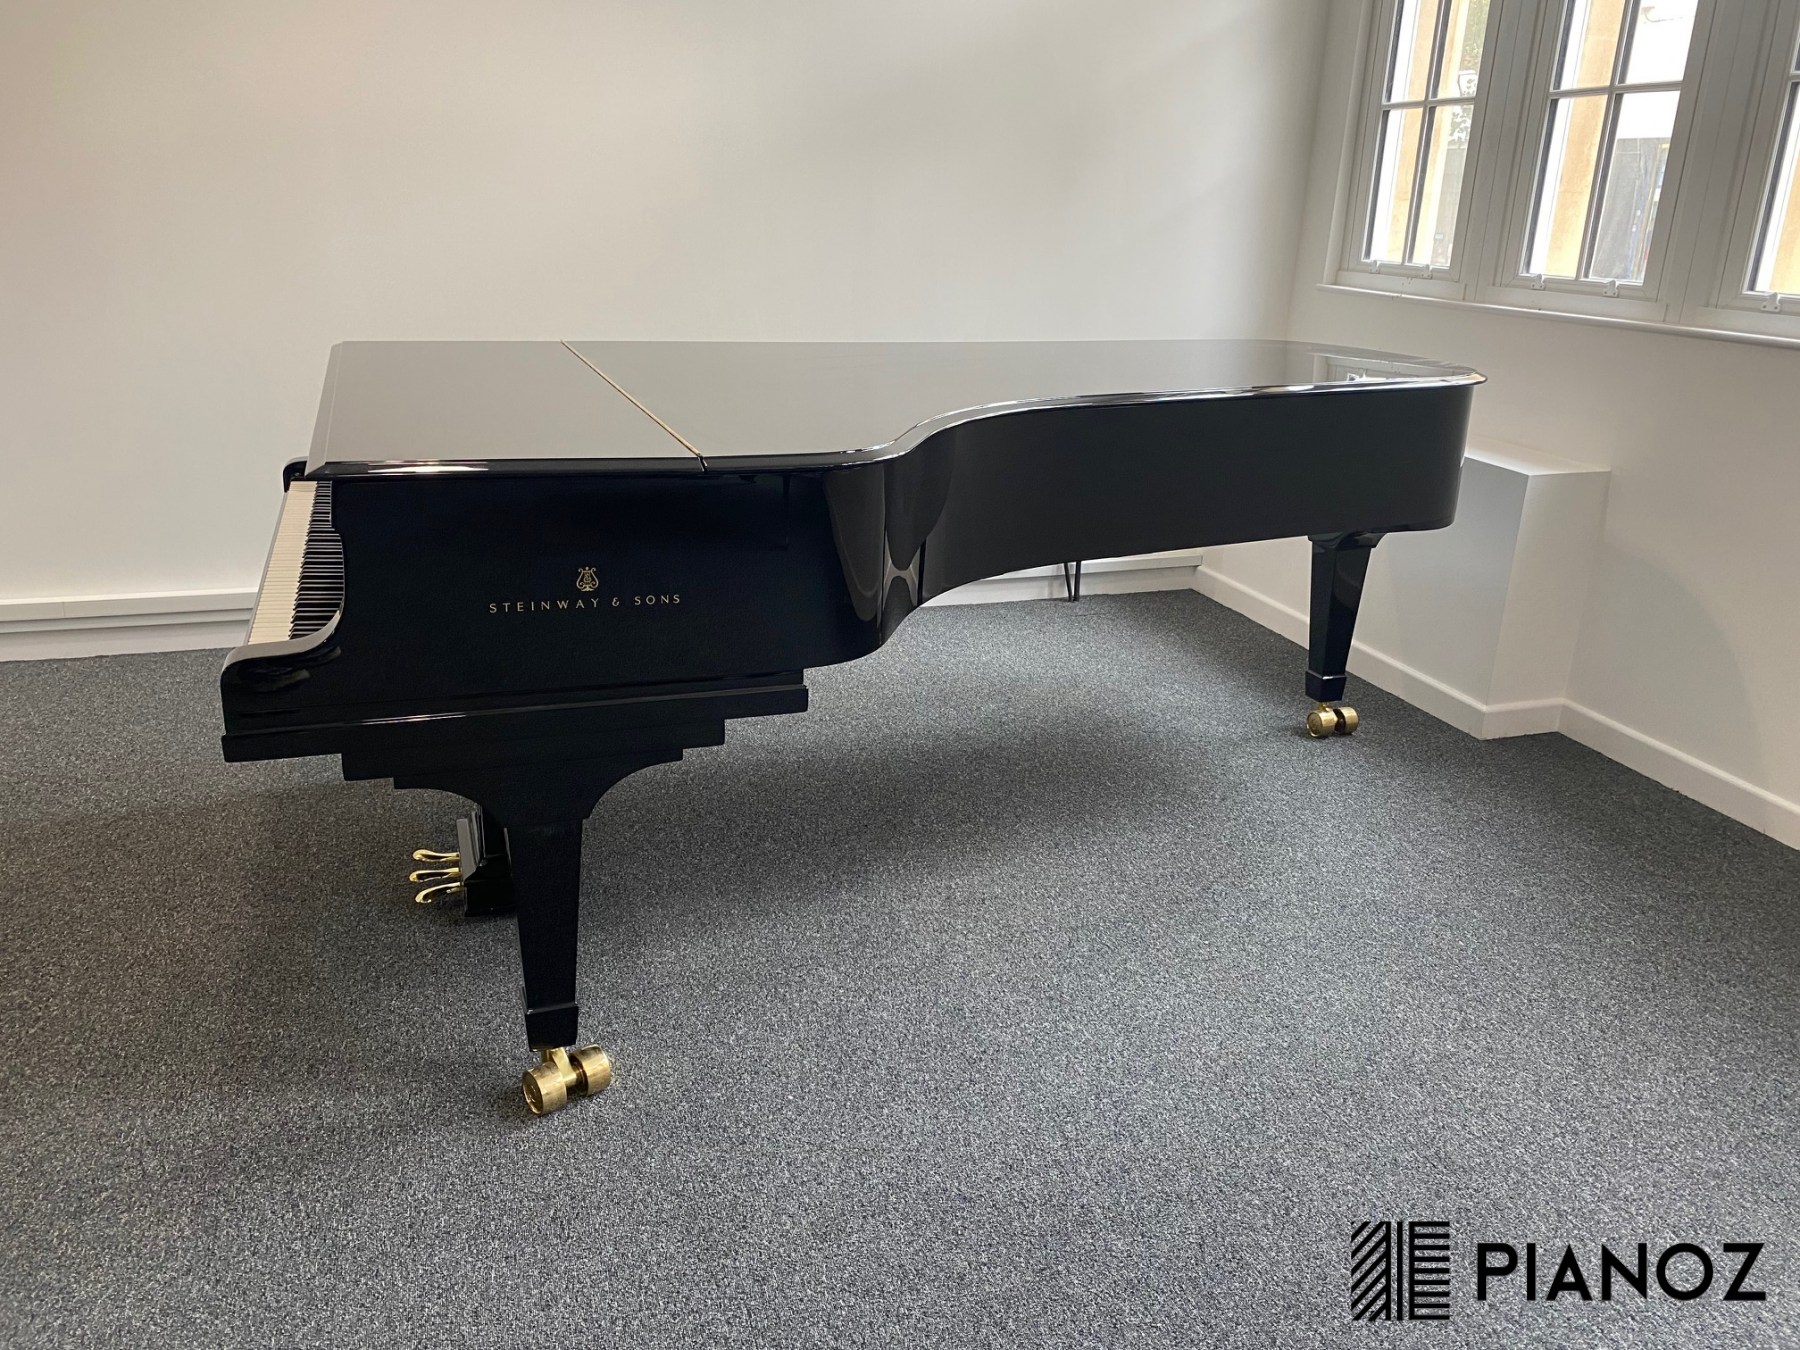 Steinway & Sons Model D 1923 Concert Grand piano for sale in UK